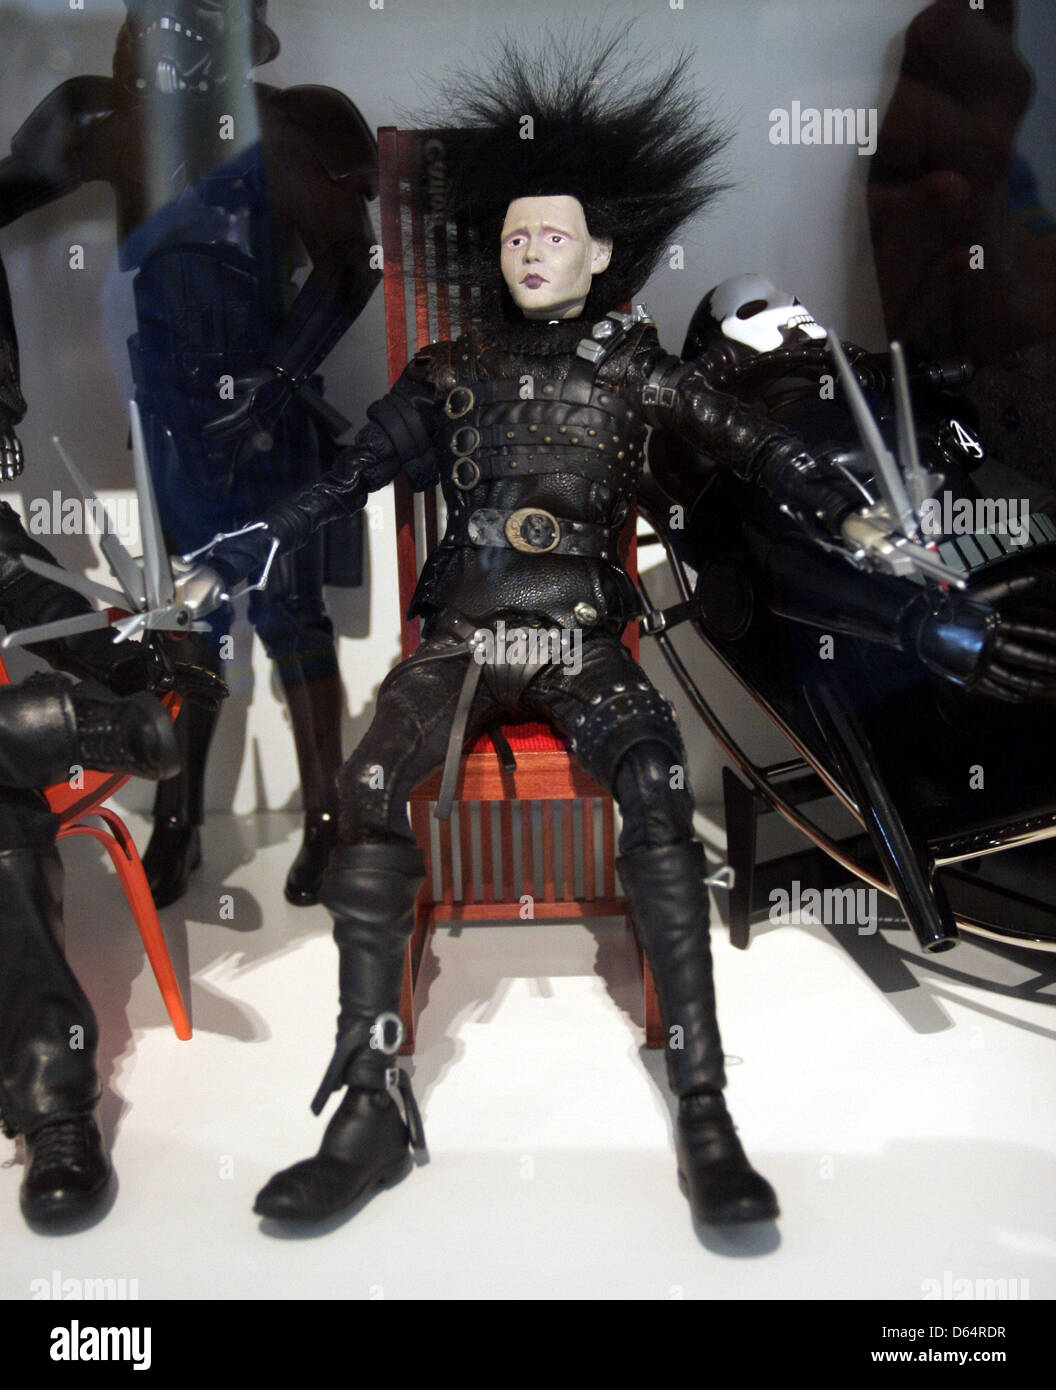 A figurine of Edward Scissorhands is featured at the exhibition 'Art & Toys' with items of the collection of Selim Varol at gallery me Collectors Room in Berlin, Germany, 24 May 2012. Photo: XAMAX Stock Photo